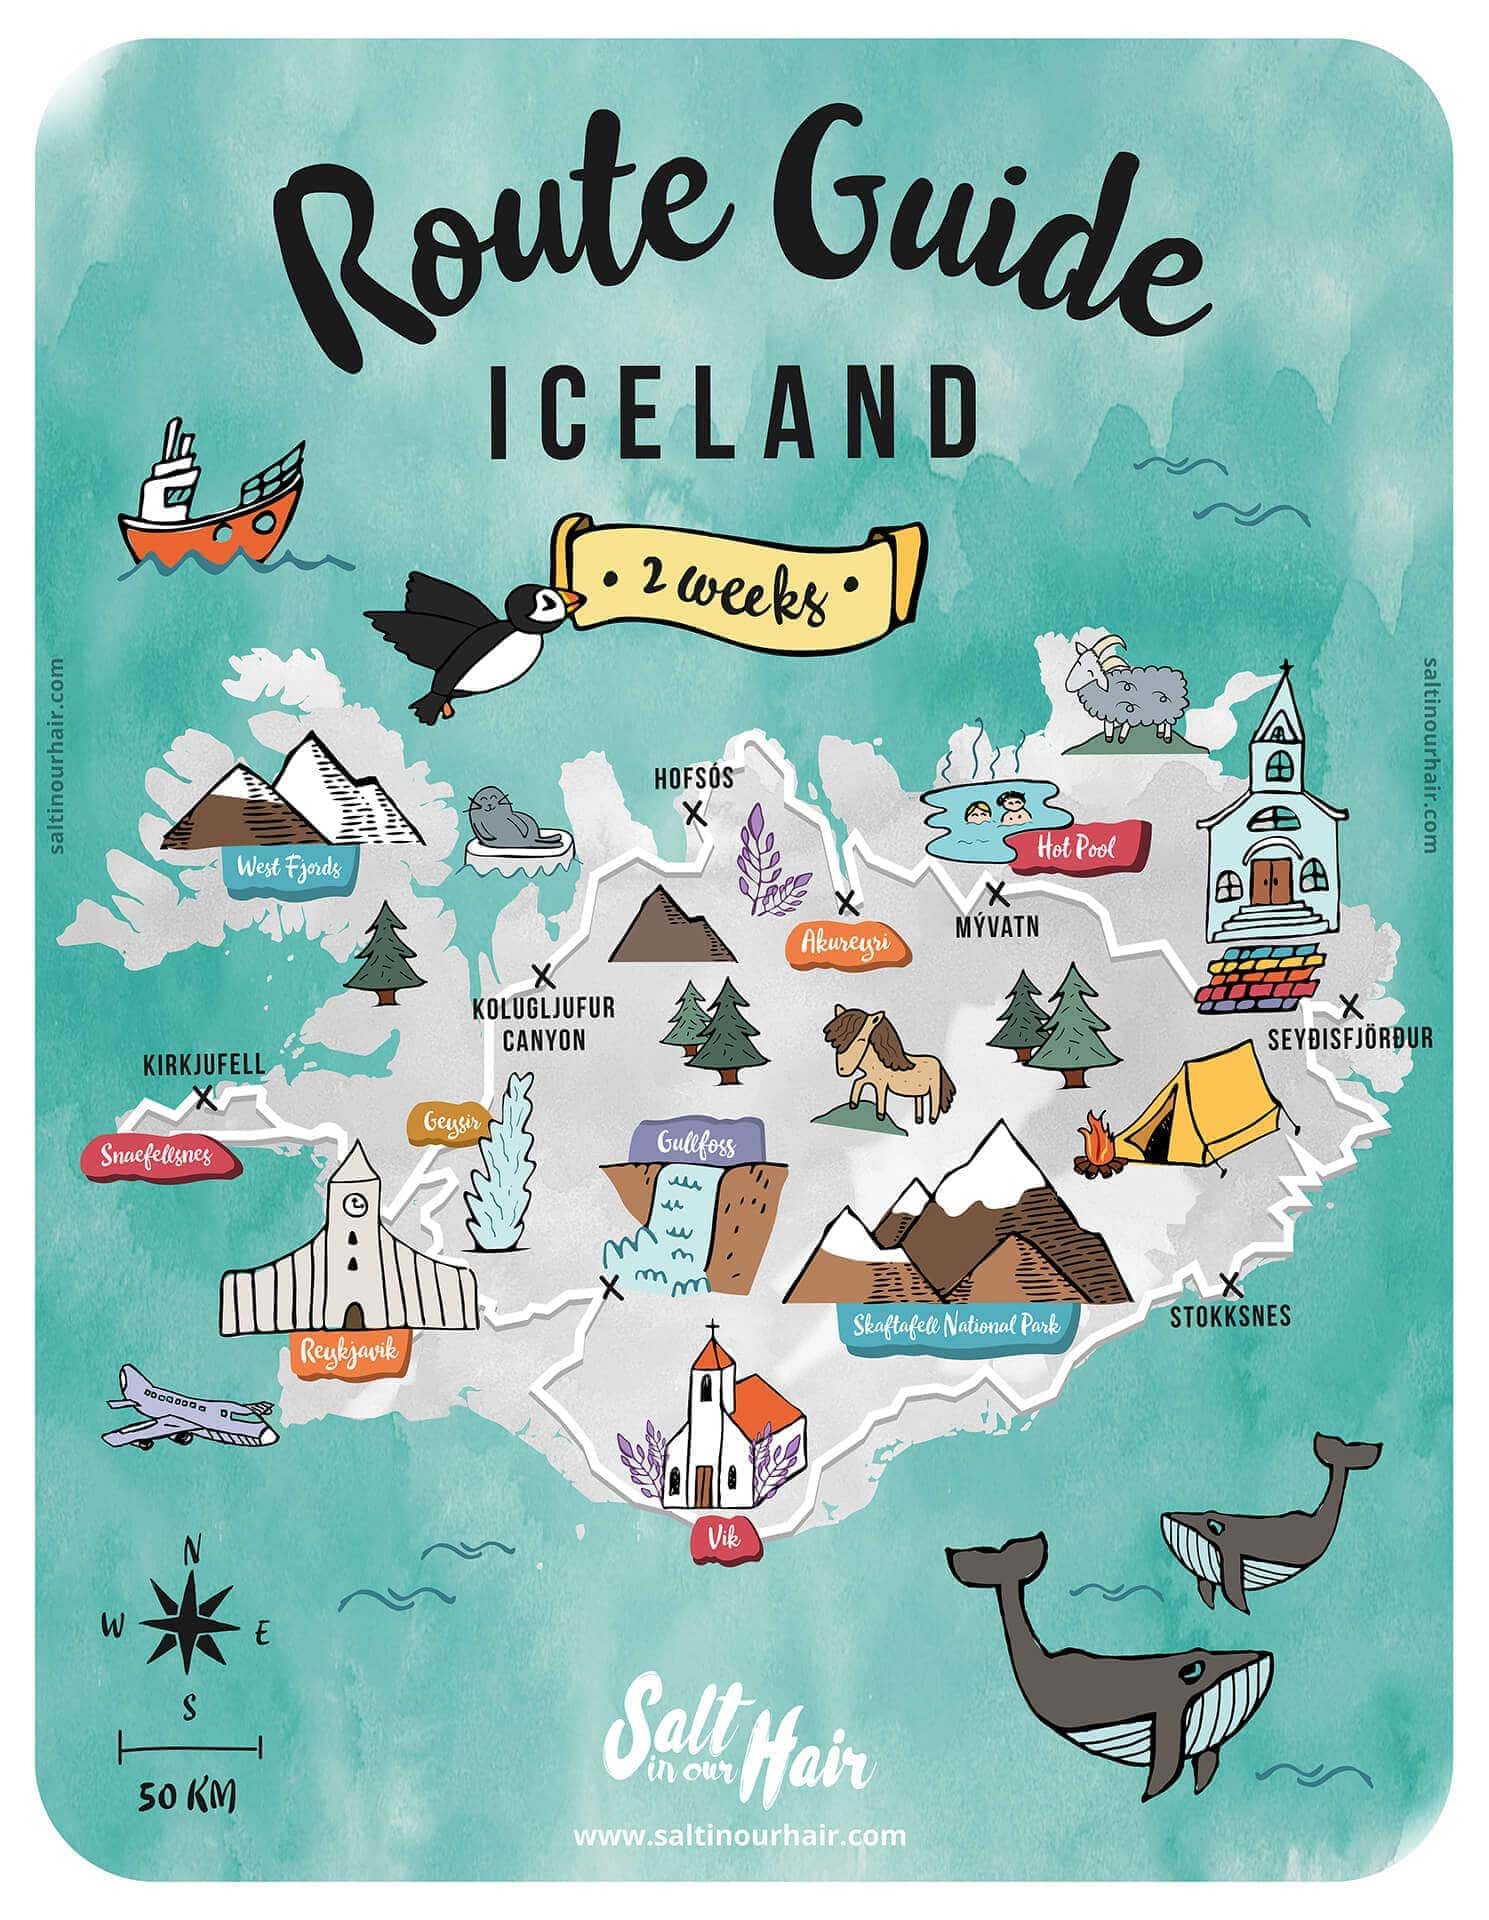 iceland travel guide map